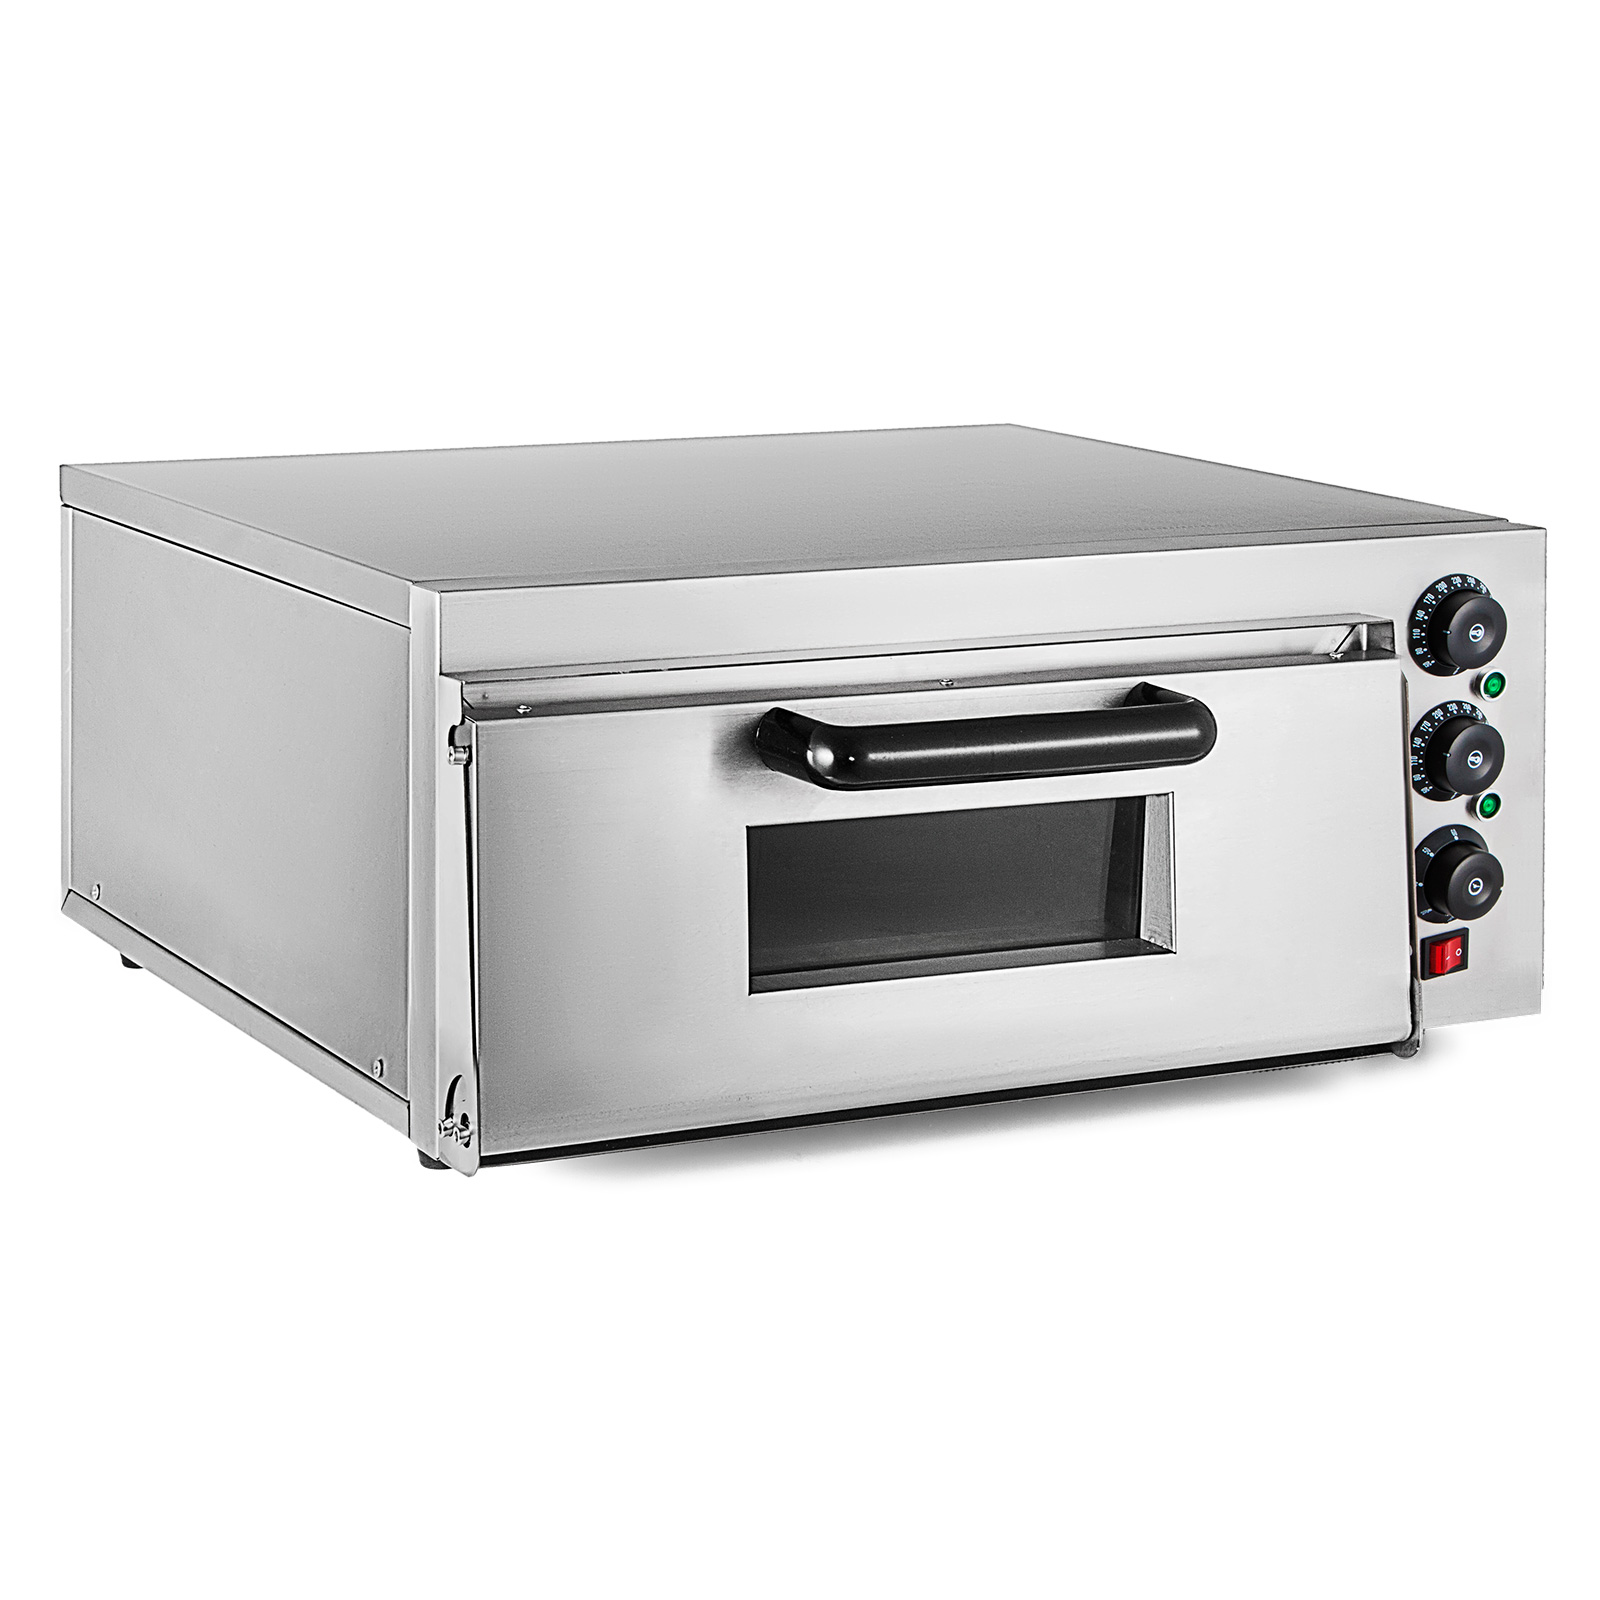 2000W Stainless 12-14Inch Pizza Bread Snack Ovens Baking Machine W/ Timer Home